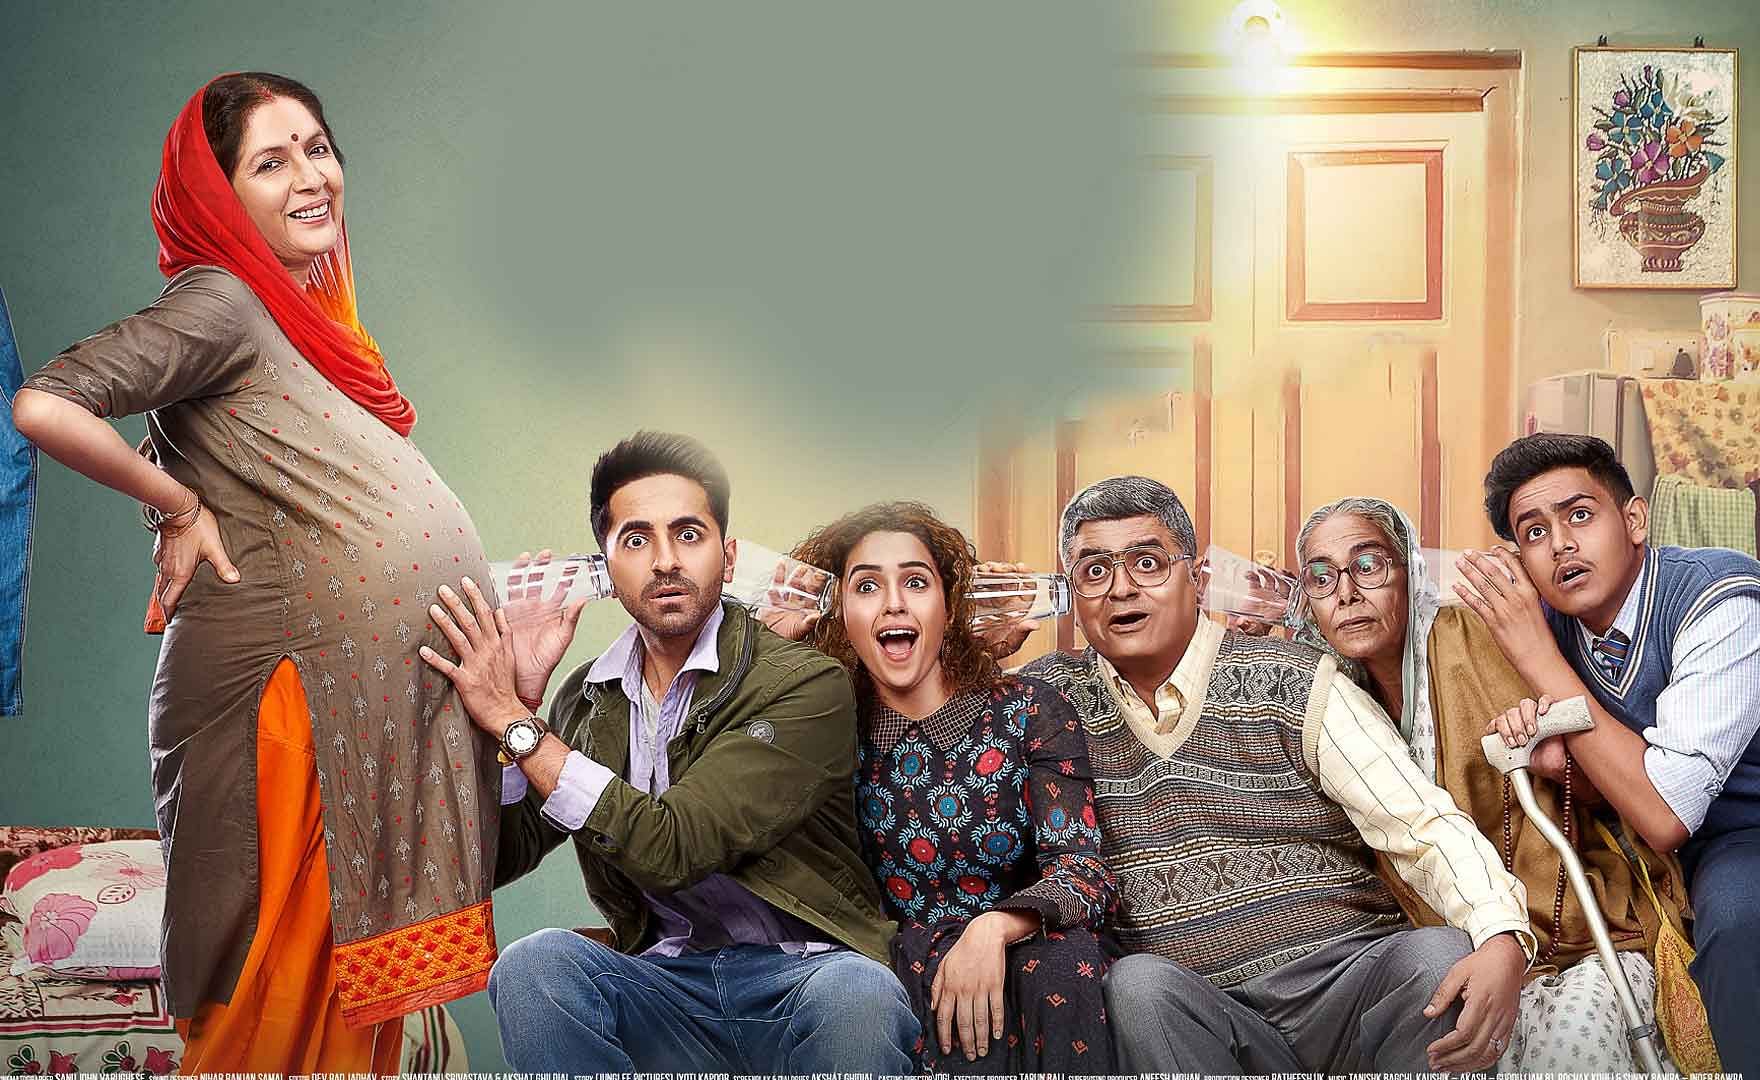 The makers of the film deserve many 'Badhaai-s' for zero platitudes, exceptions in spite of predictability and creating a joyful watch.